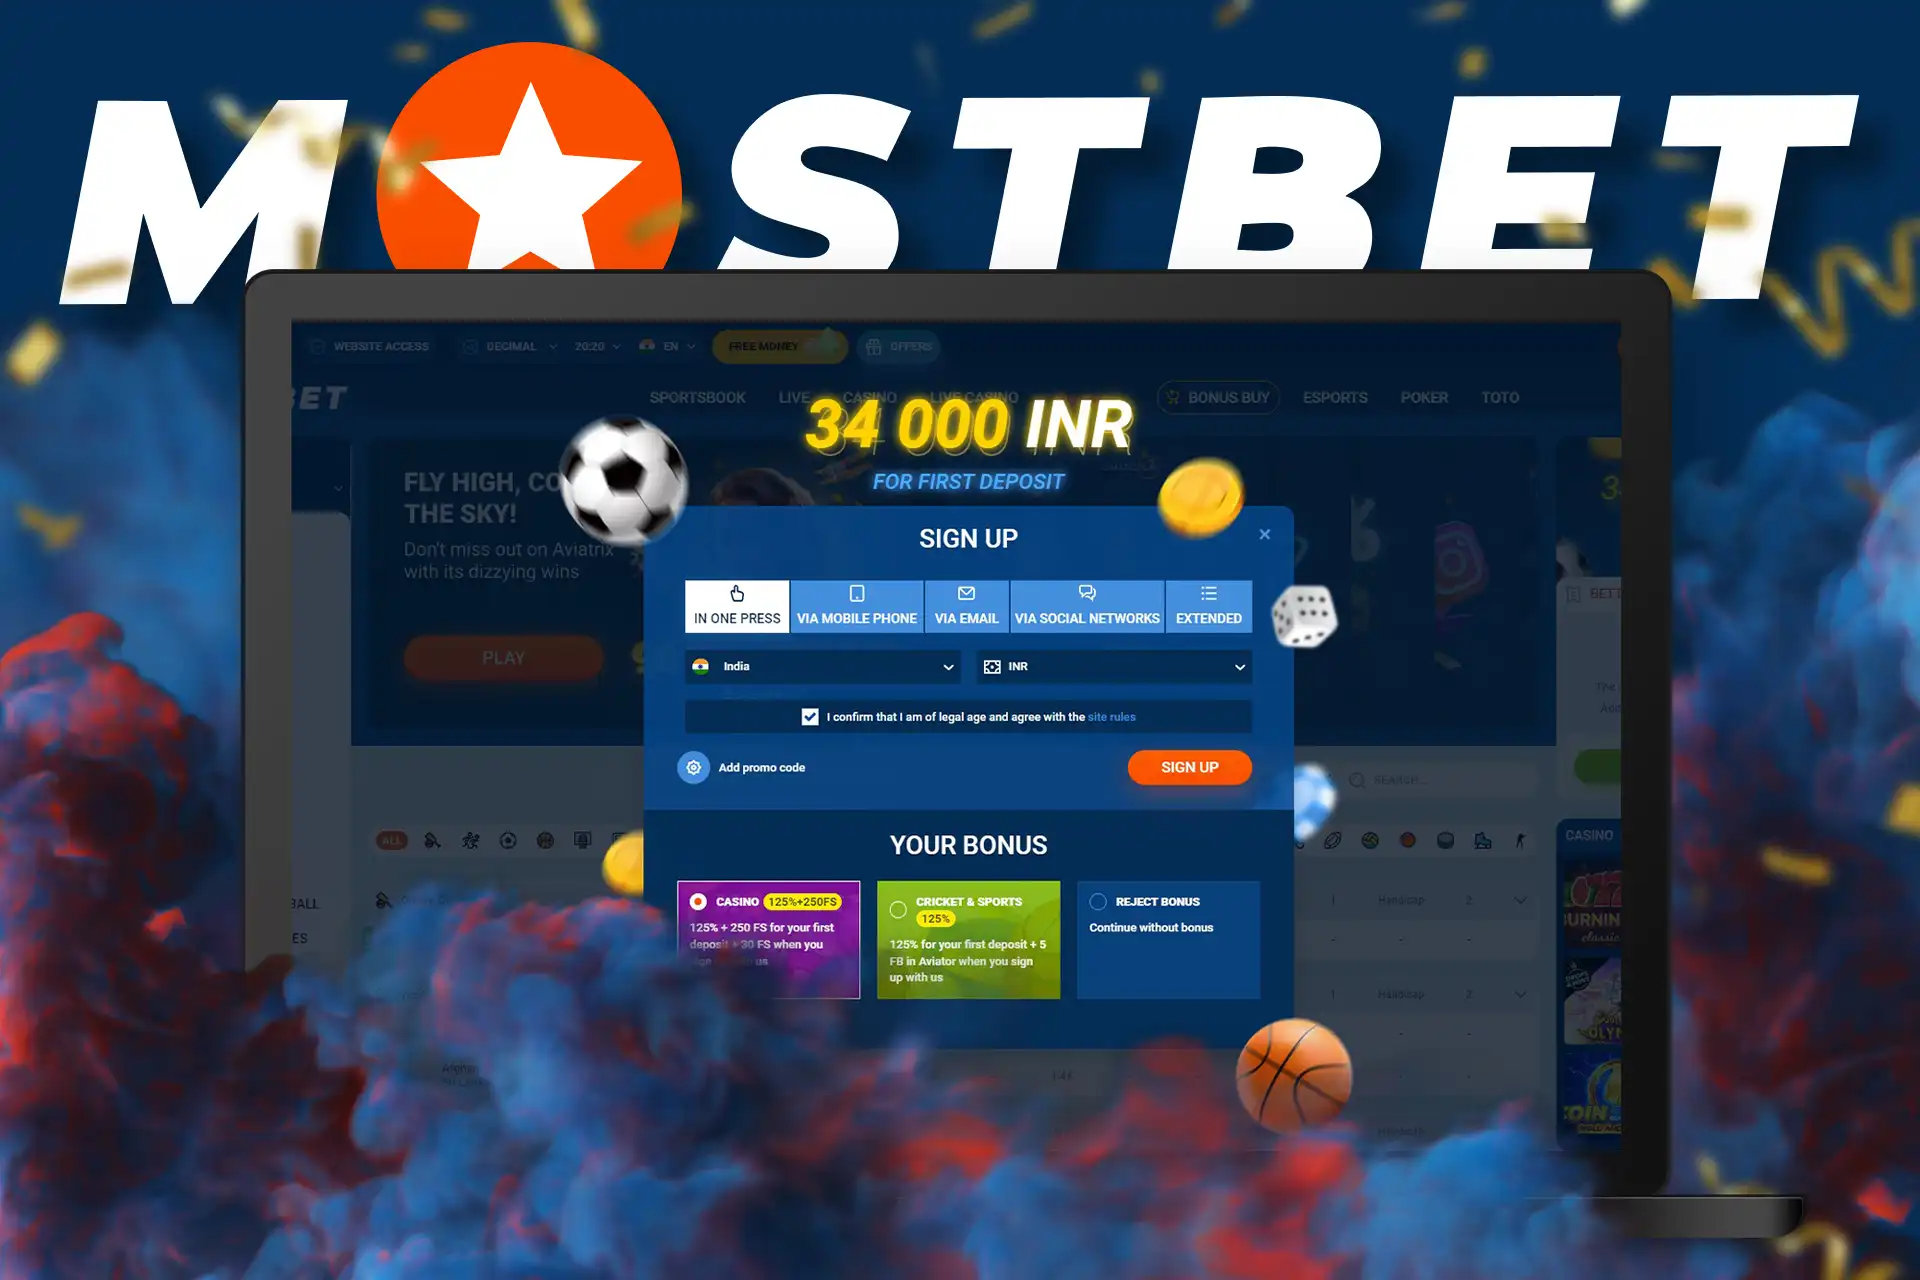 Get registered at Mostbet to get started at the online casino.